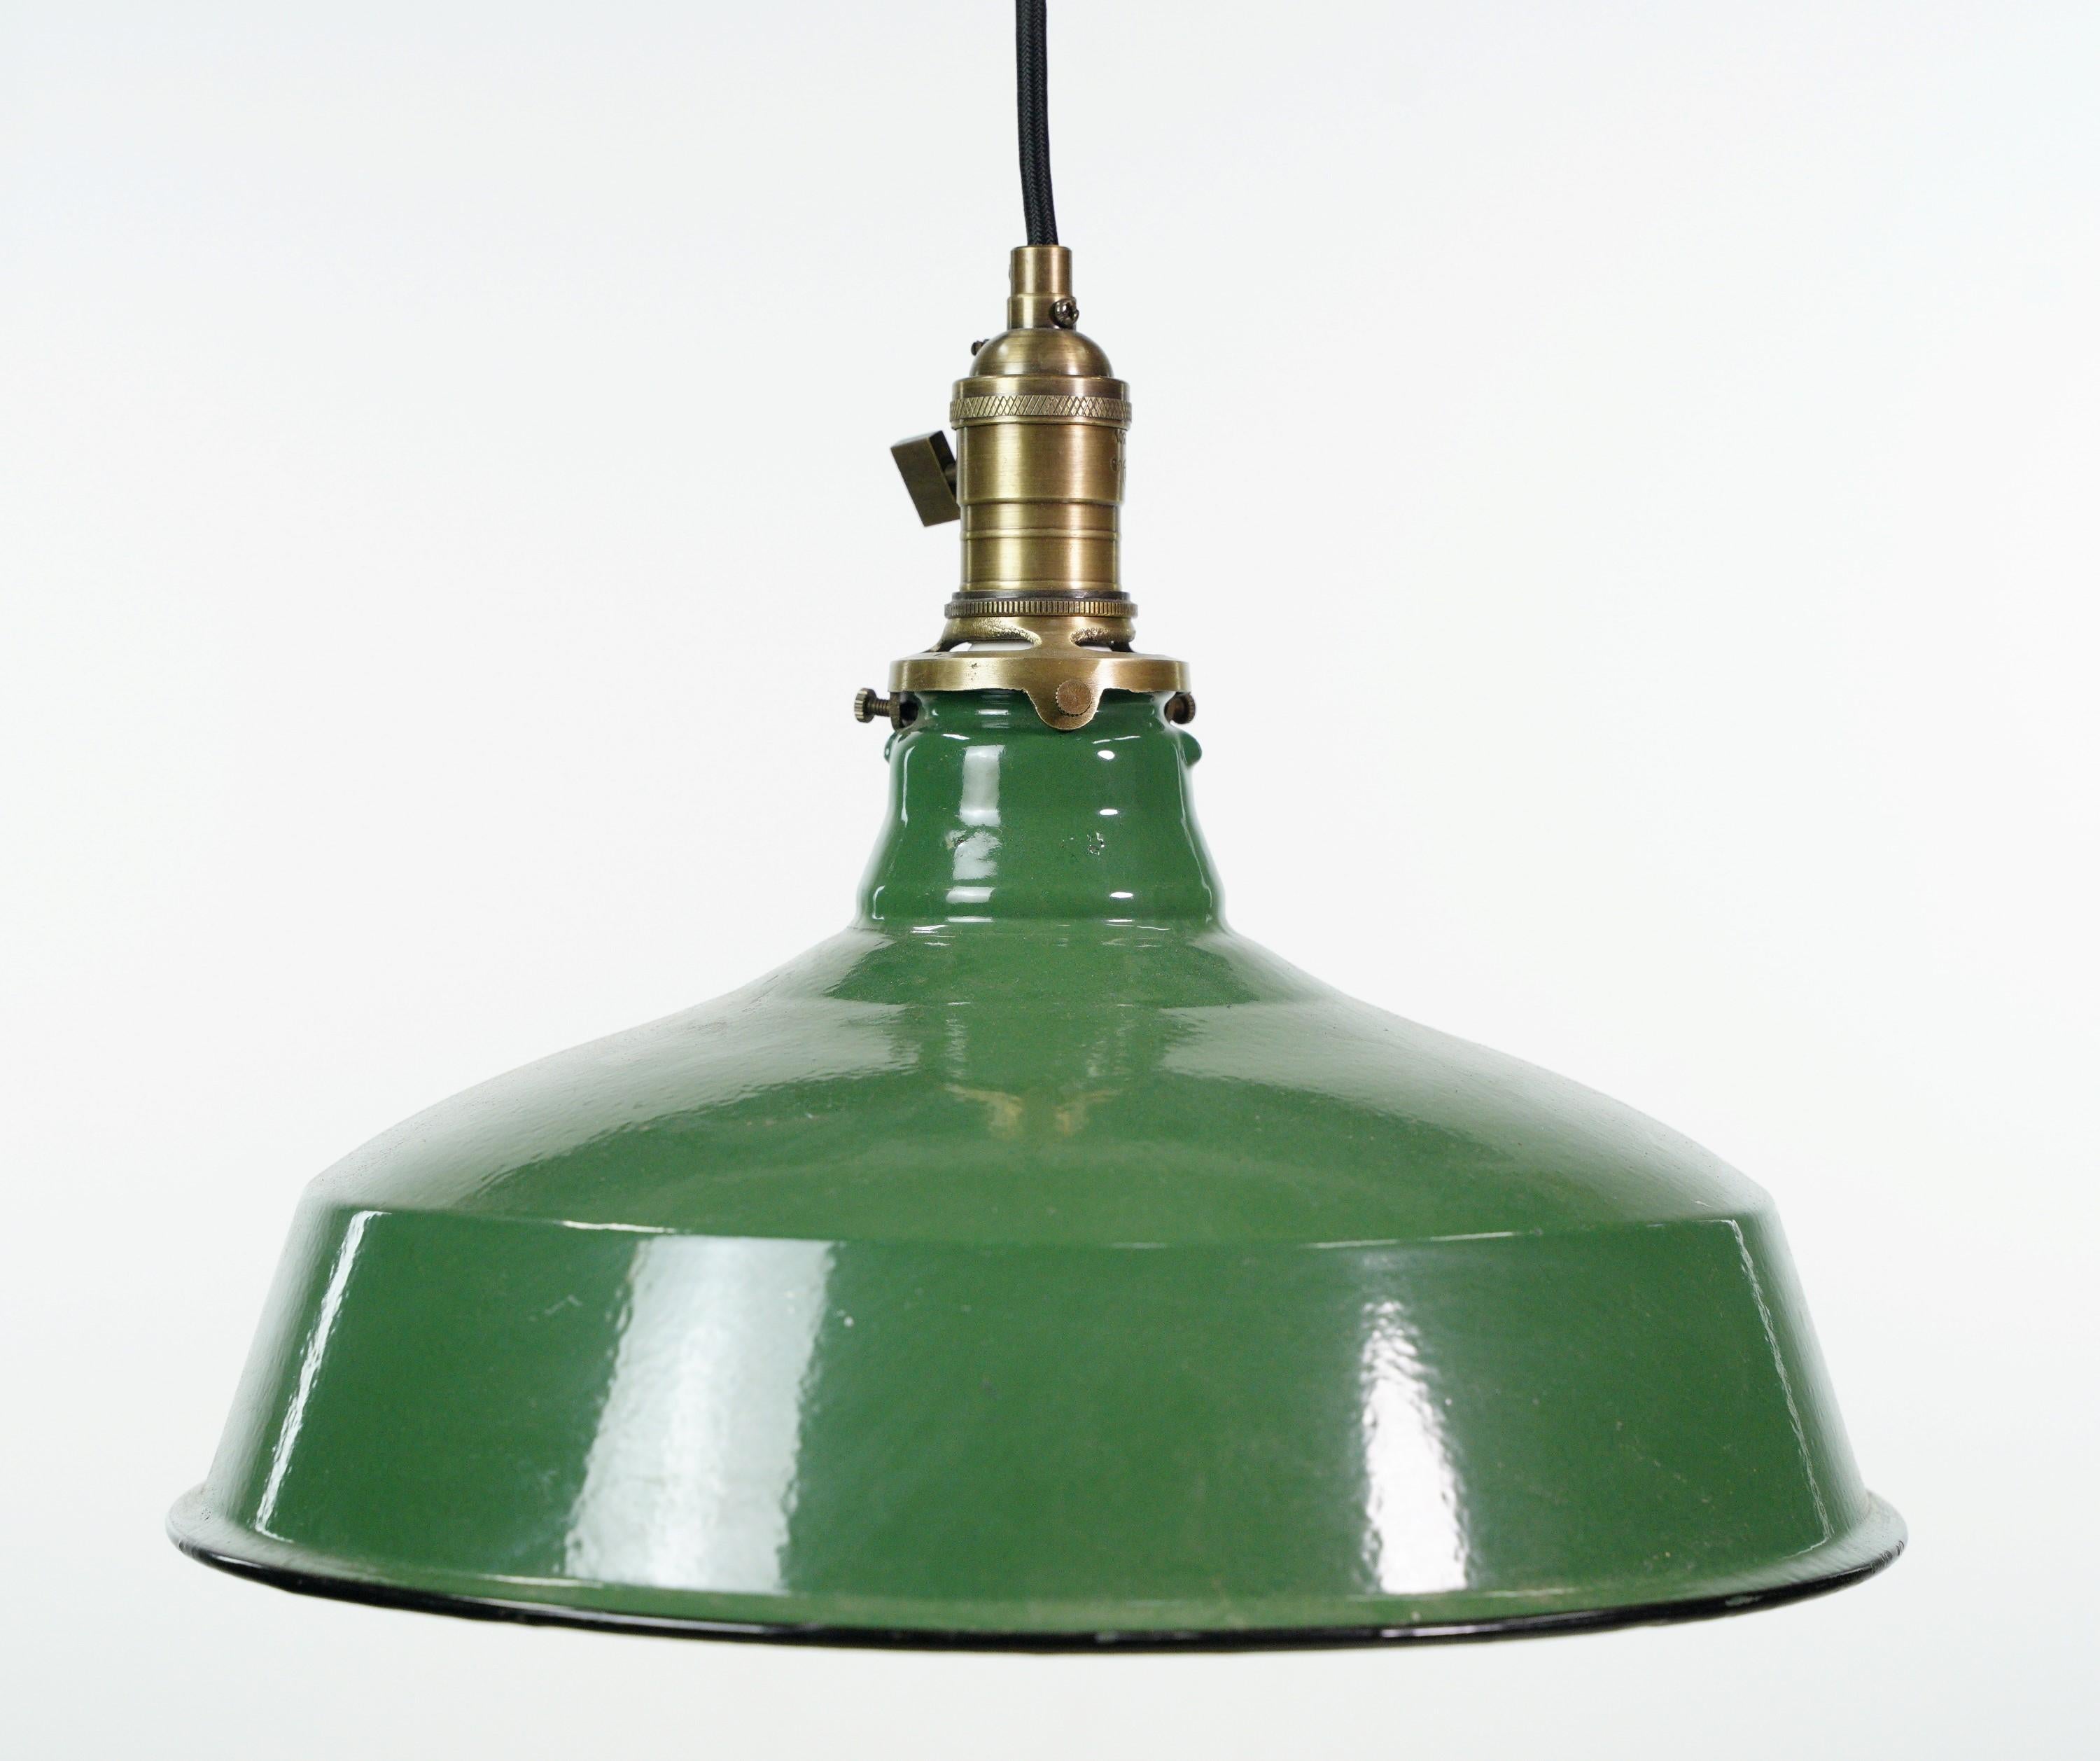 Industrial pendant light featuring a vintage green and white enameled steel shade with a newly made black cord and antique brass finished fitter. This unique blend of materials and finishes creates a bold statement piece that combines vintage charm